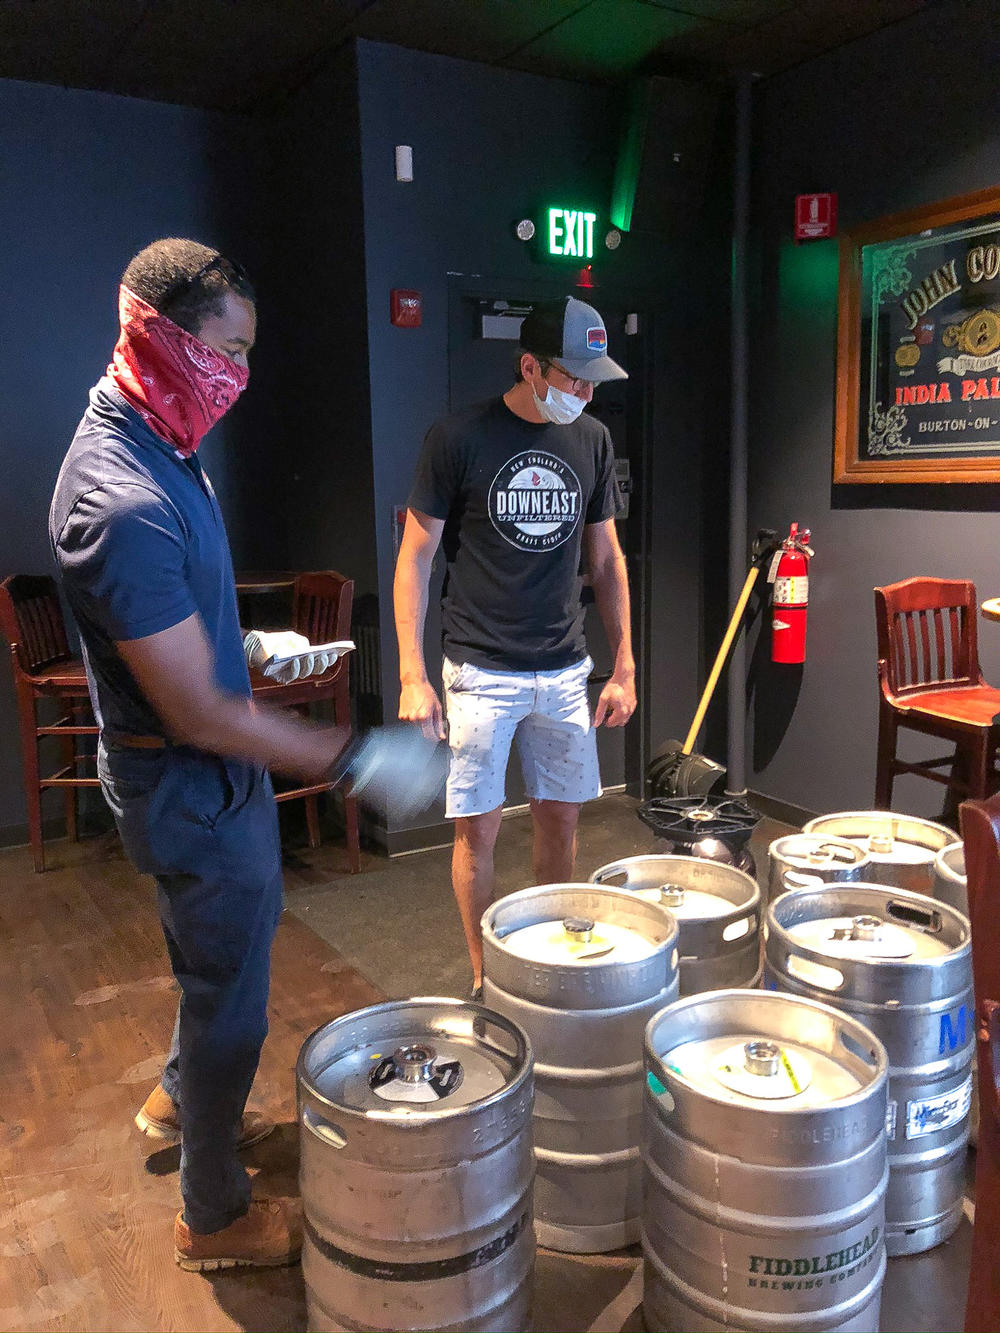 Vinny Gibson of Burke Distributing counts up kegs that Cornwall's is returning. The pub bought the beer in March, when it expected big crowds for Saint Patrick's Day, but the kegs have been gathering dust and the beer has gone flat since the pub closed because of the coronavirus.